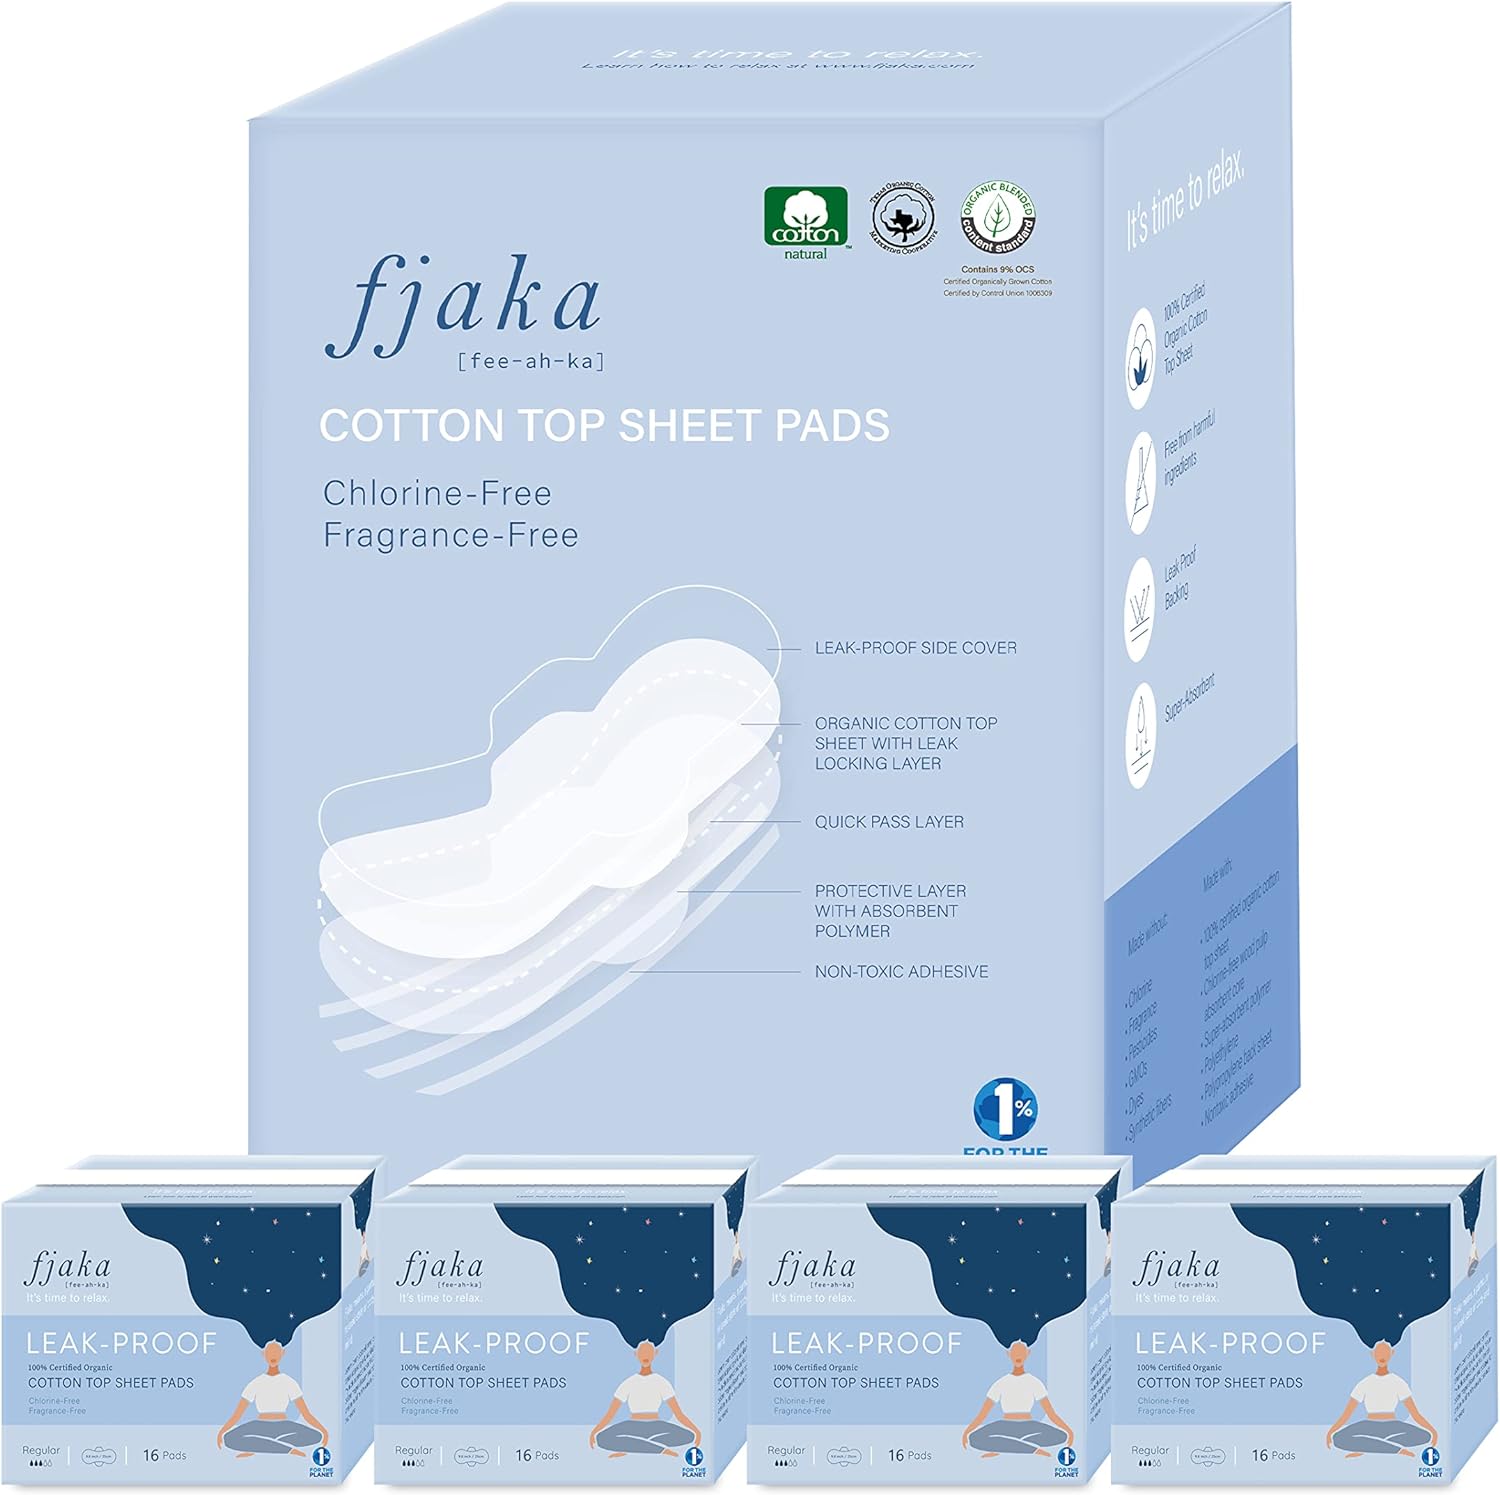 FJAKA USA [fee-ah-ka] Feminine Care Organic Cotton Cover Pads - Ultra Thin Sanitary Napkin Pads Heavy Absorbency, Unscented with Pad Wings for Women